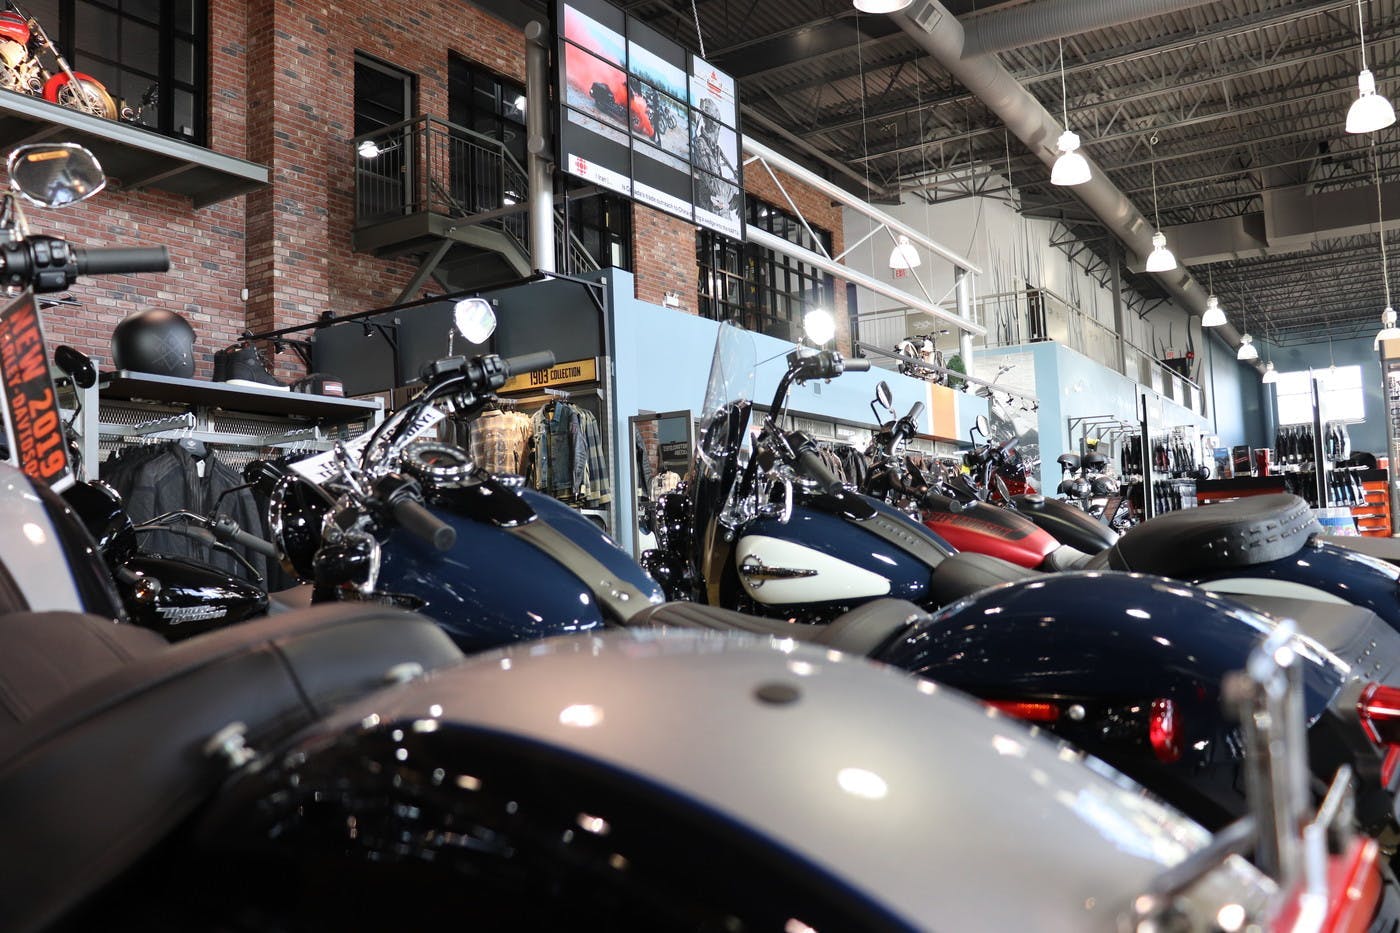 ScreenCloud Article - How Dealership Barnes Harley-Davidson Uses ScreenCloud to Deliver Engaging Promotional Materials to Customers